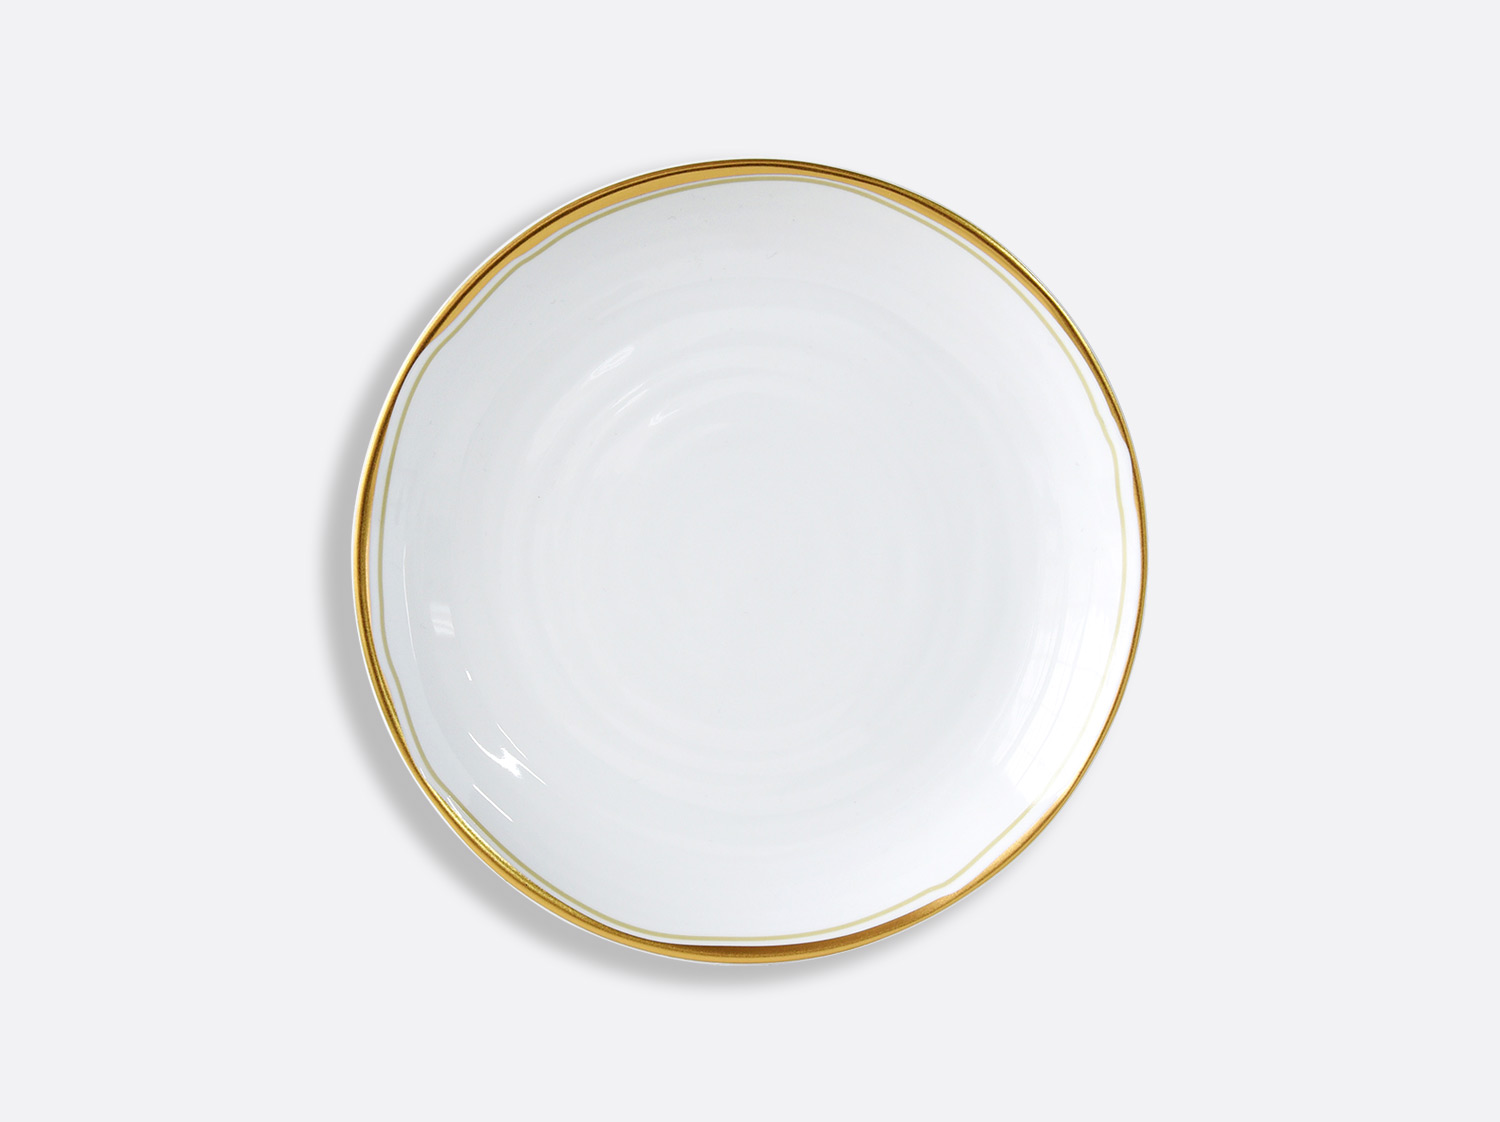 China Coupe plate 8.5" of the collection ALBÂTRE | Bernardaud